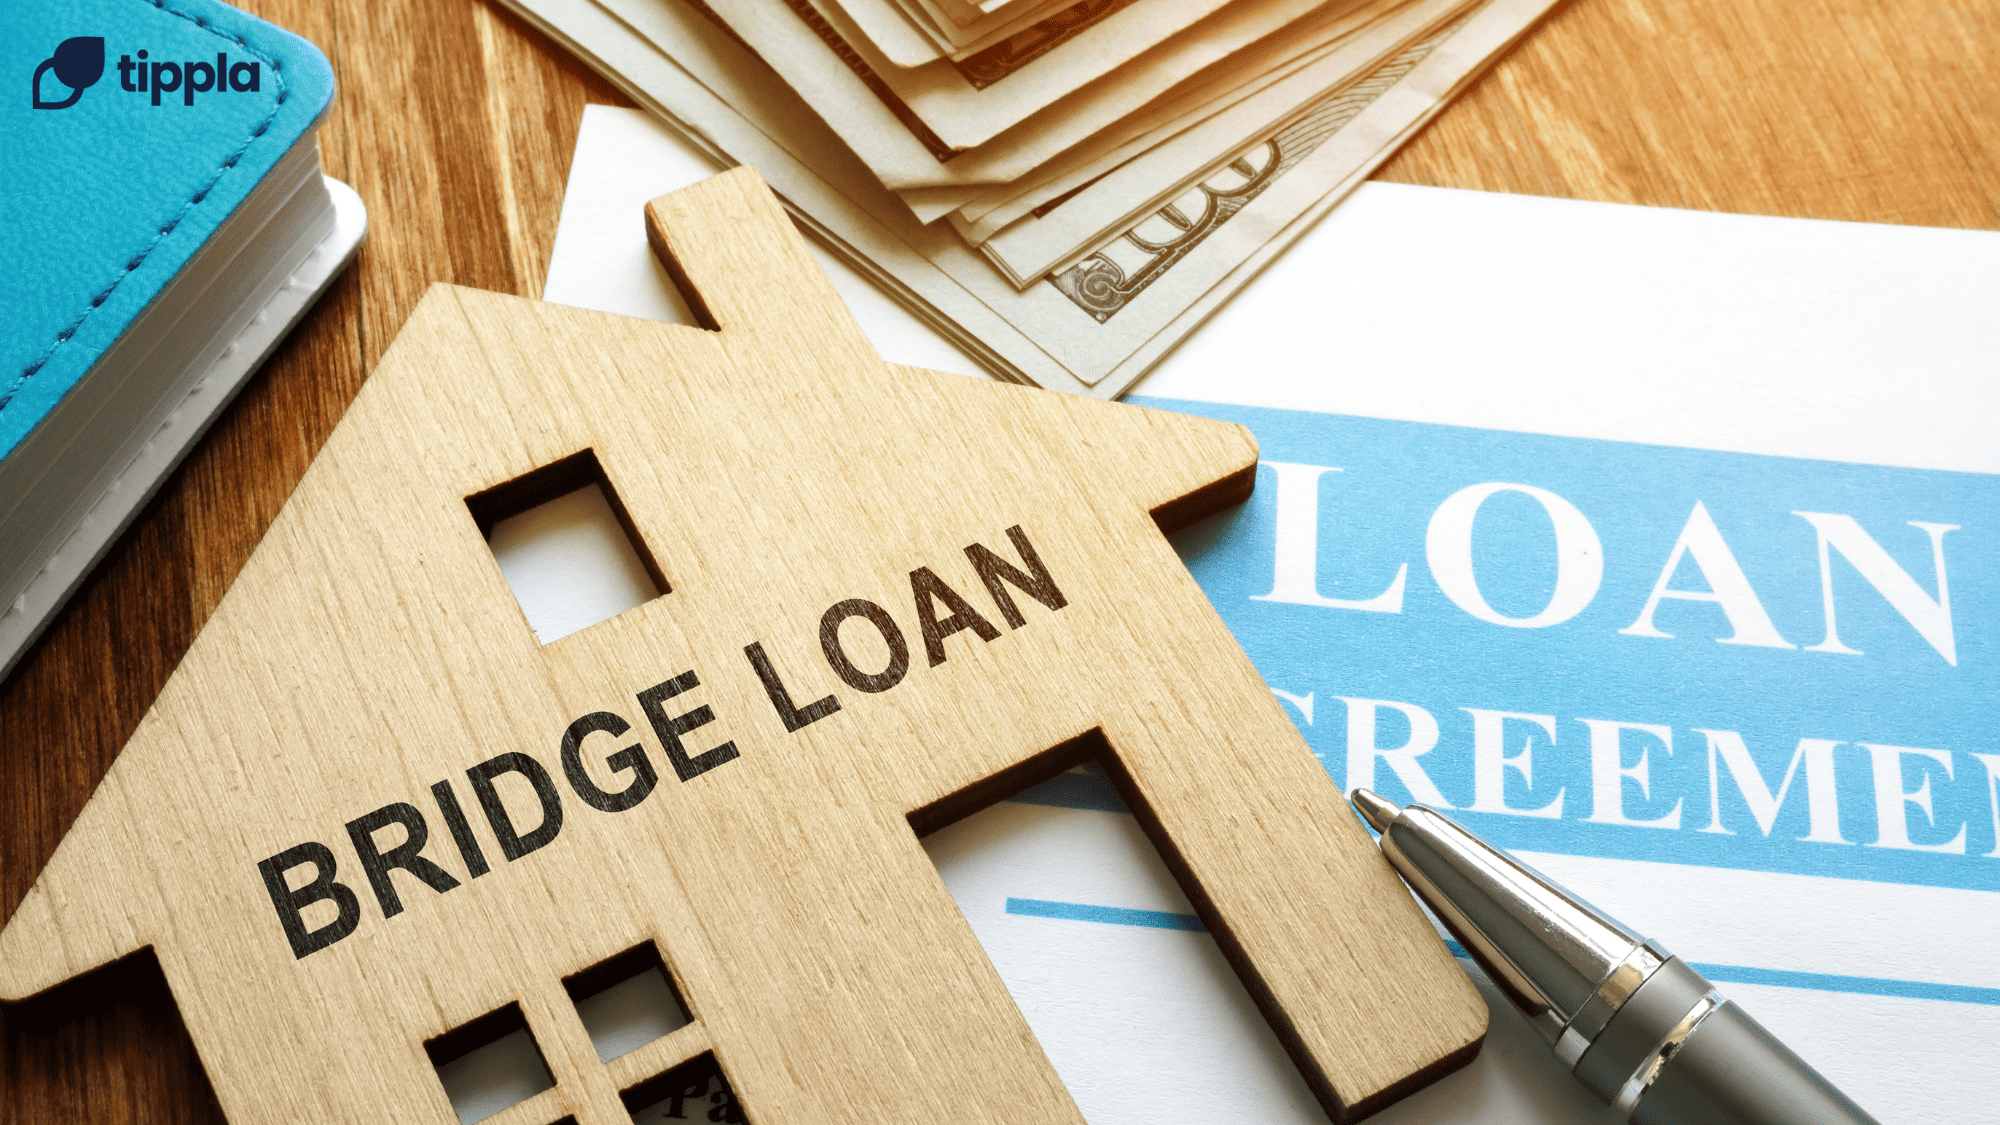 Bridging Loans for Property Purchase